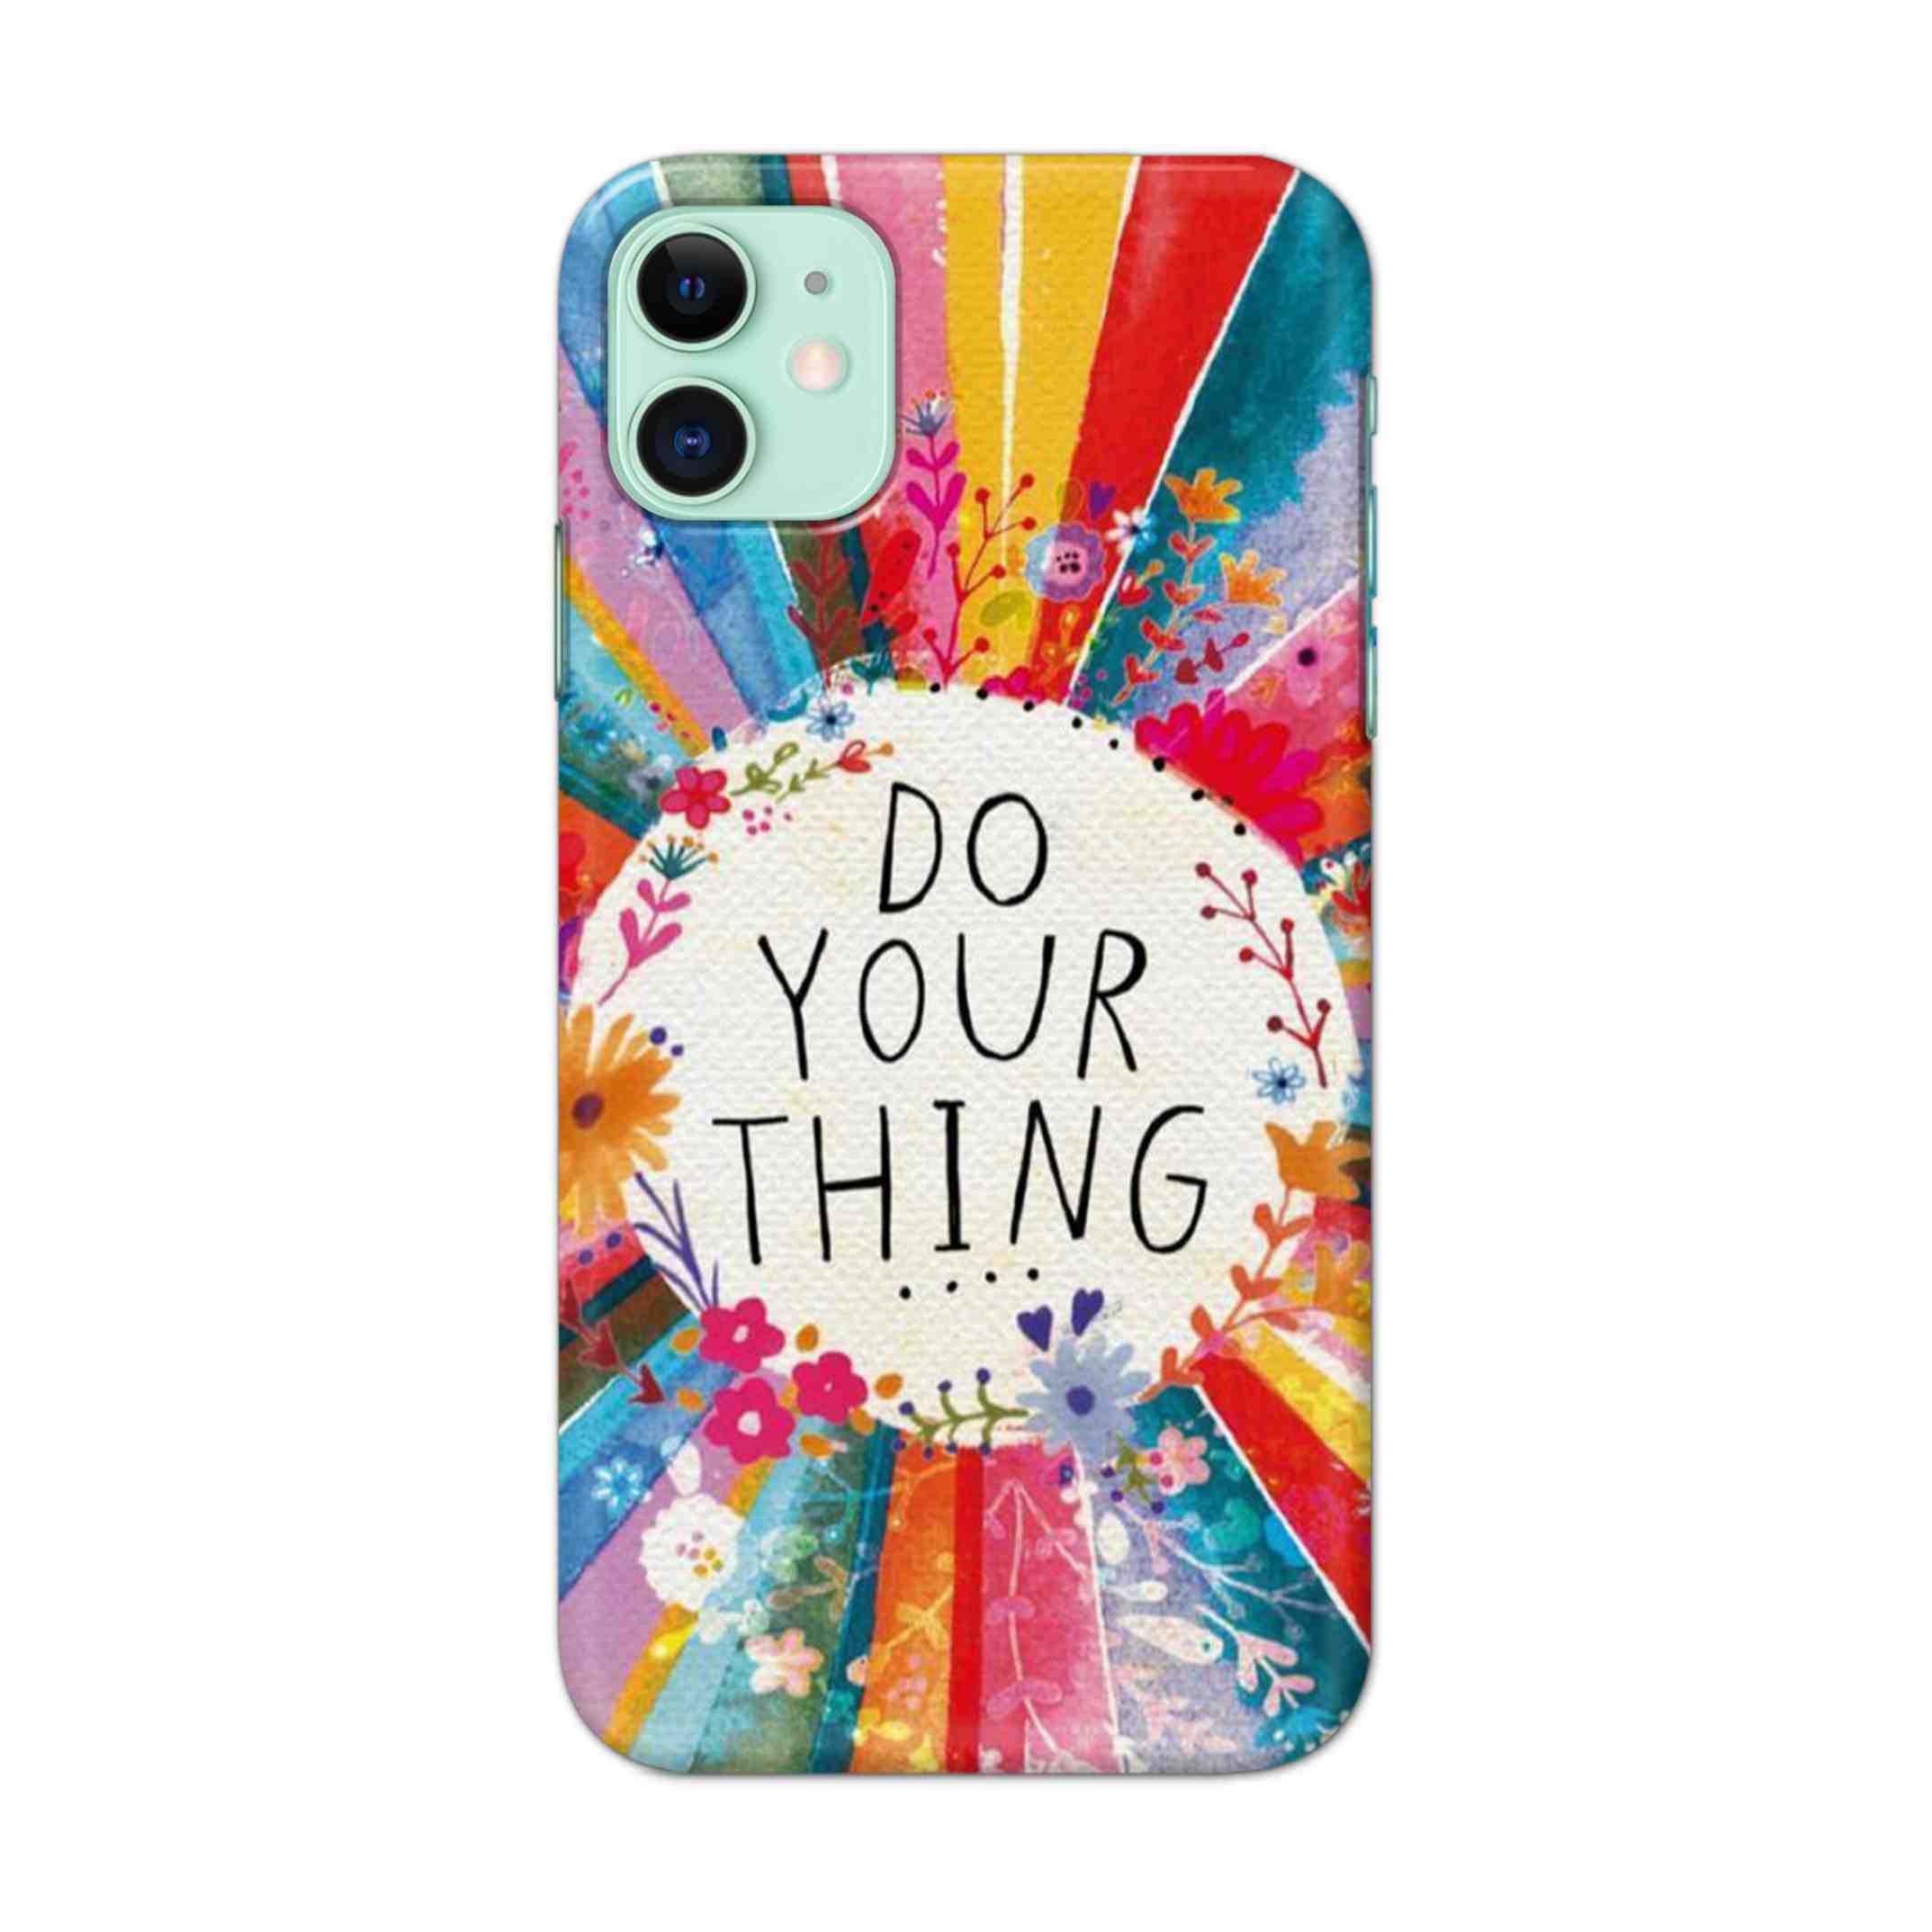 Buy Do Your Things Hard Back Mobile Phone Case Cover For iPhone 11 Online